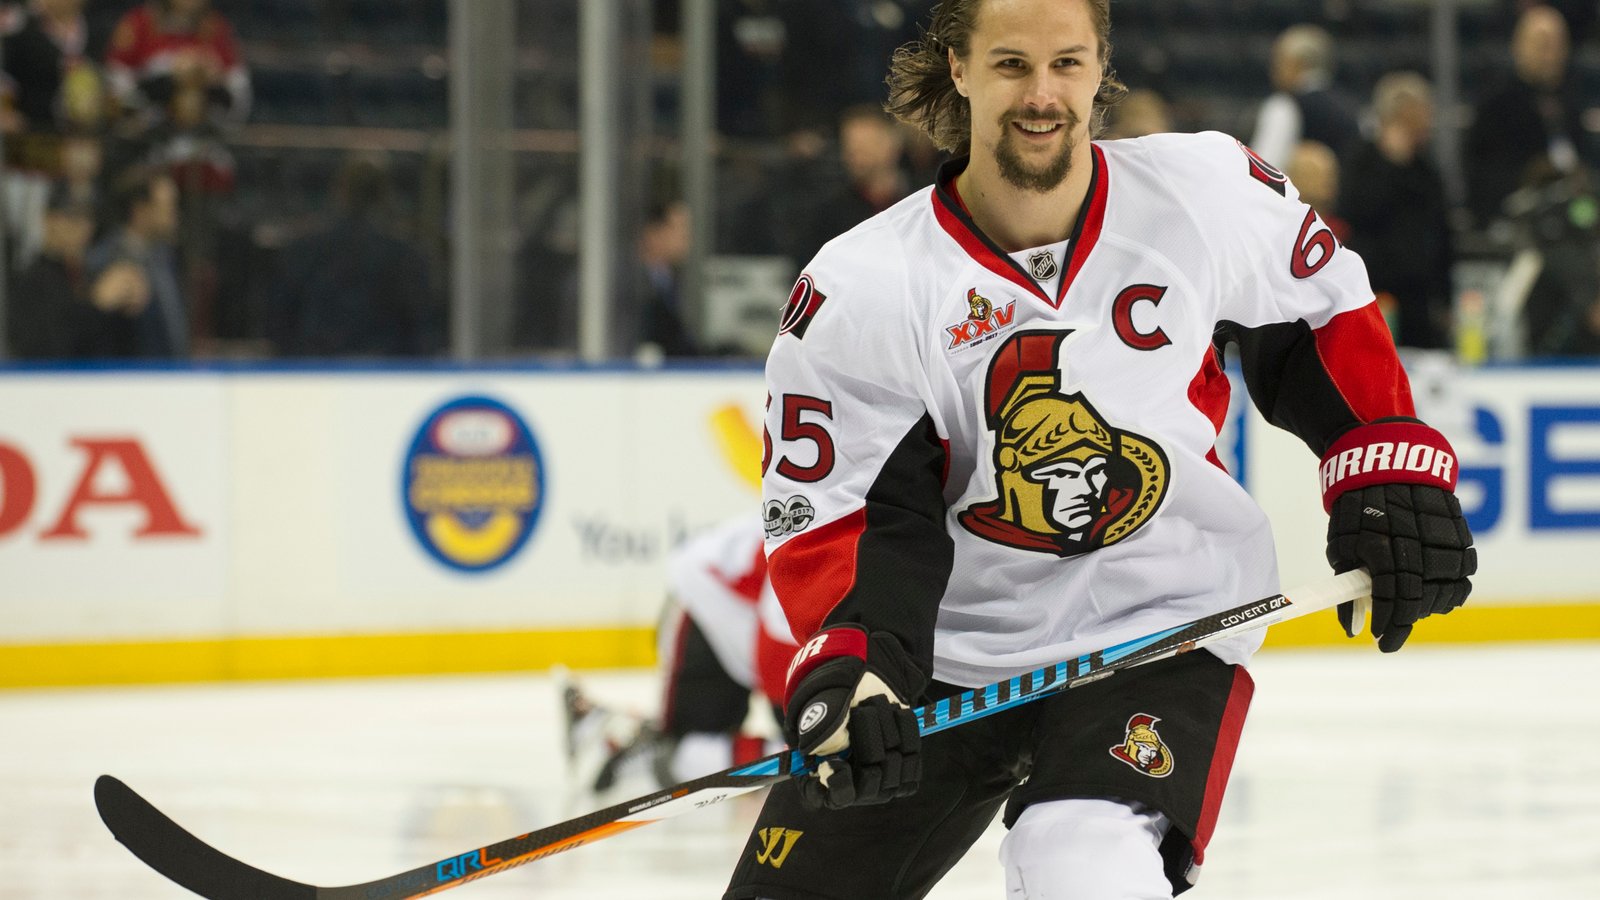 Must See: Erik Karlsson goes unrecognized at US Open